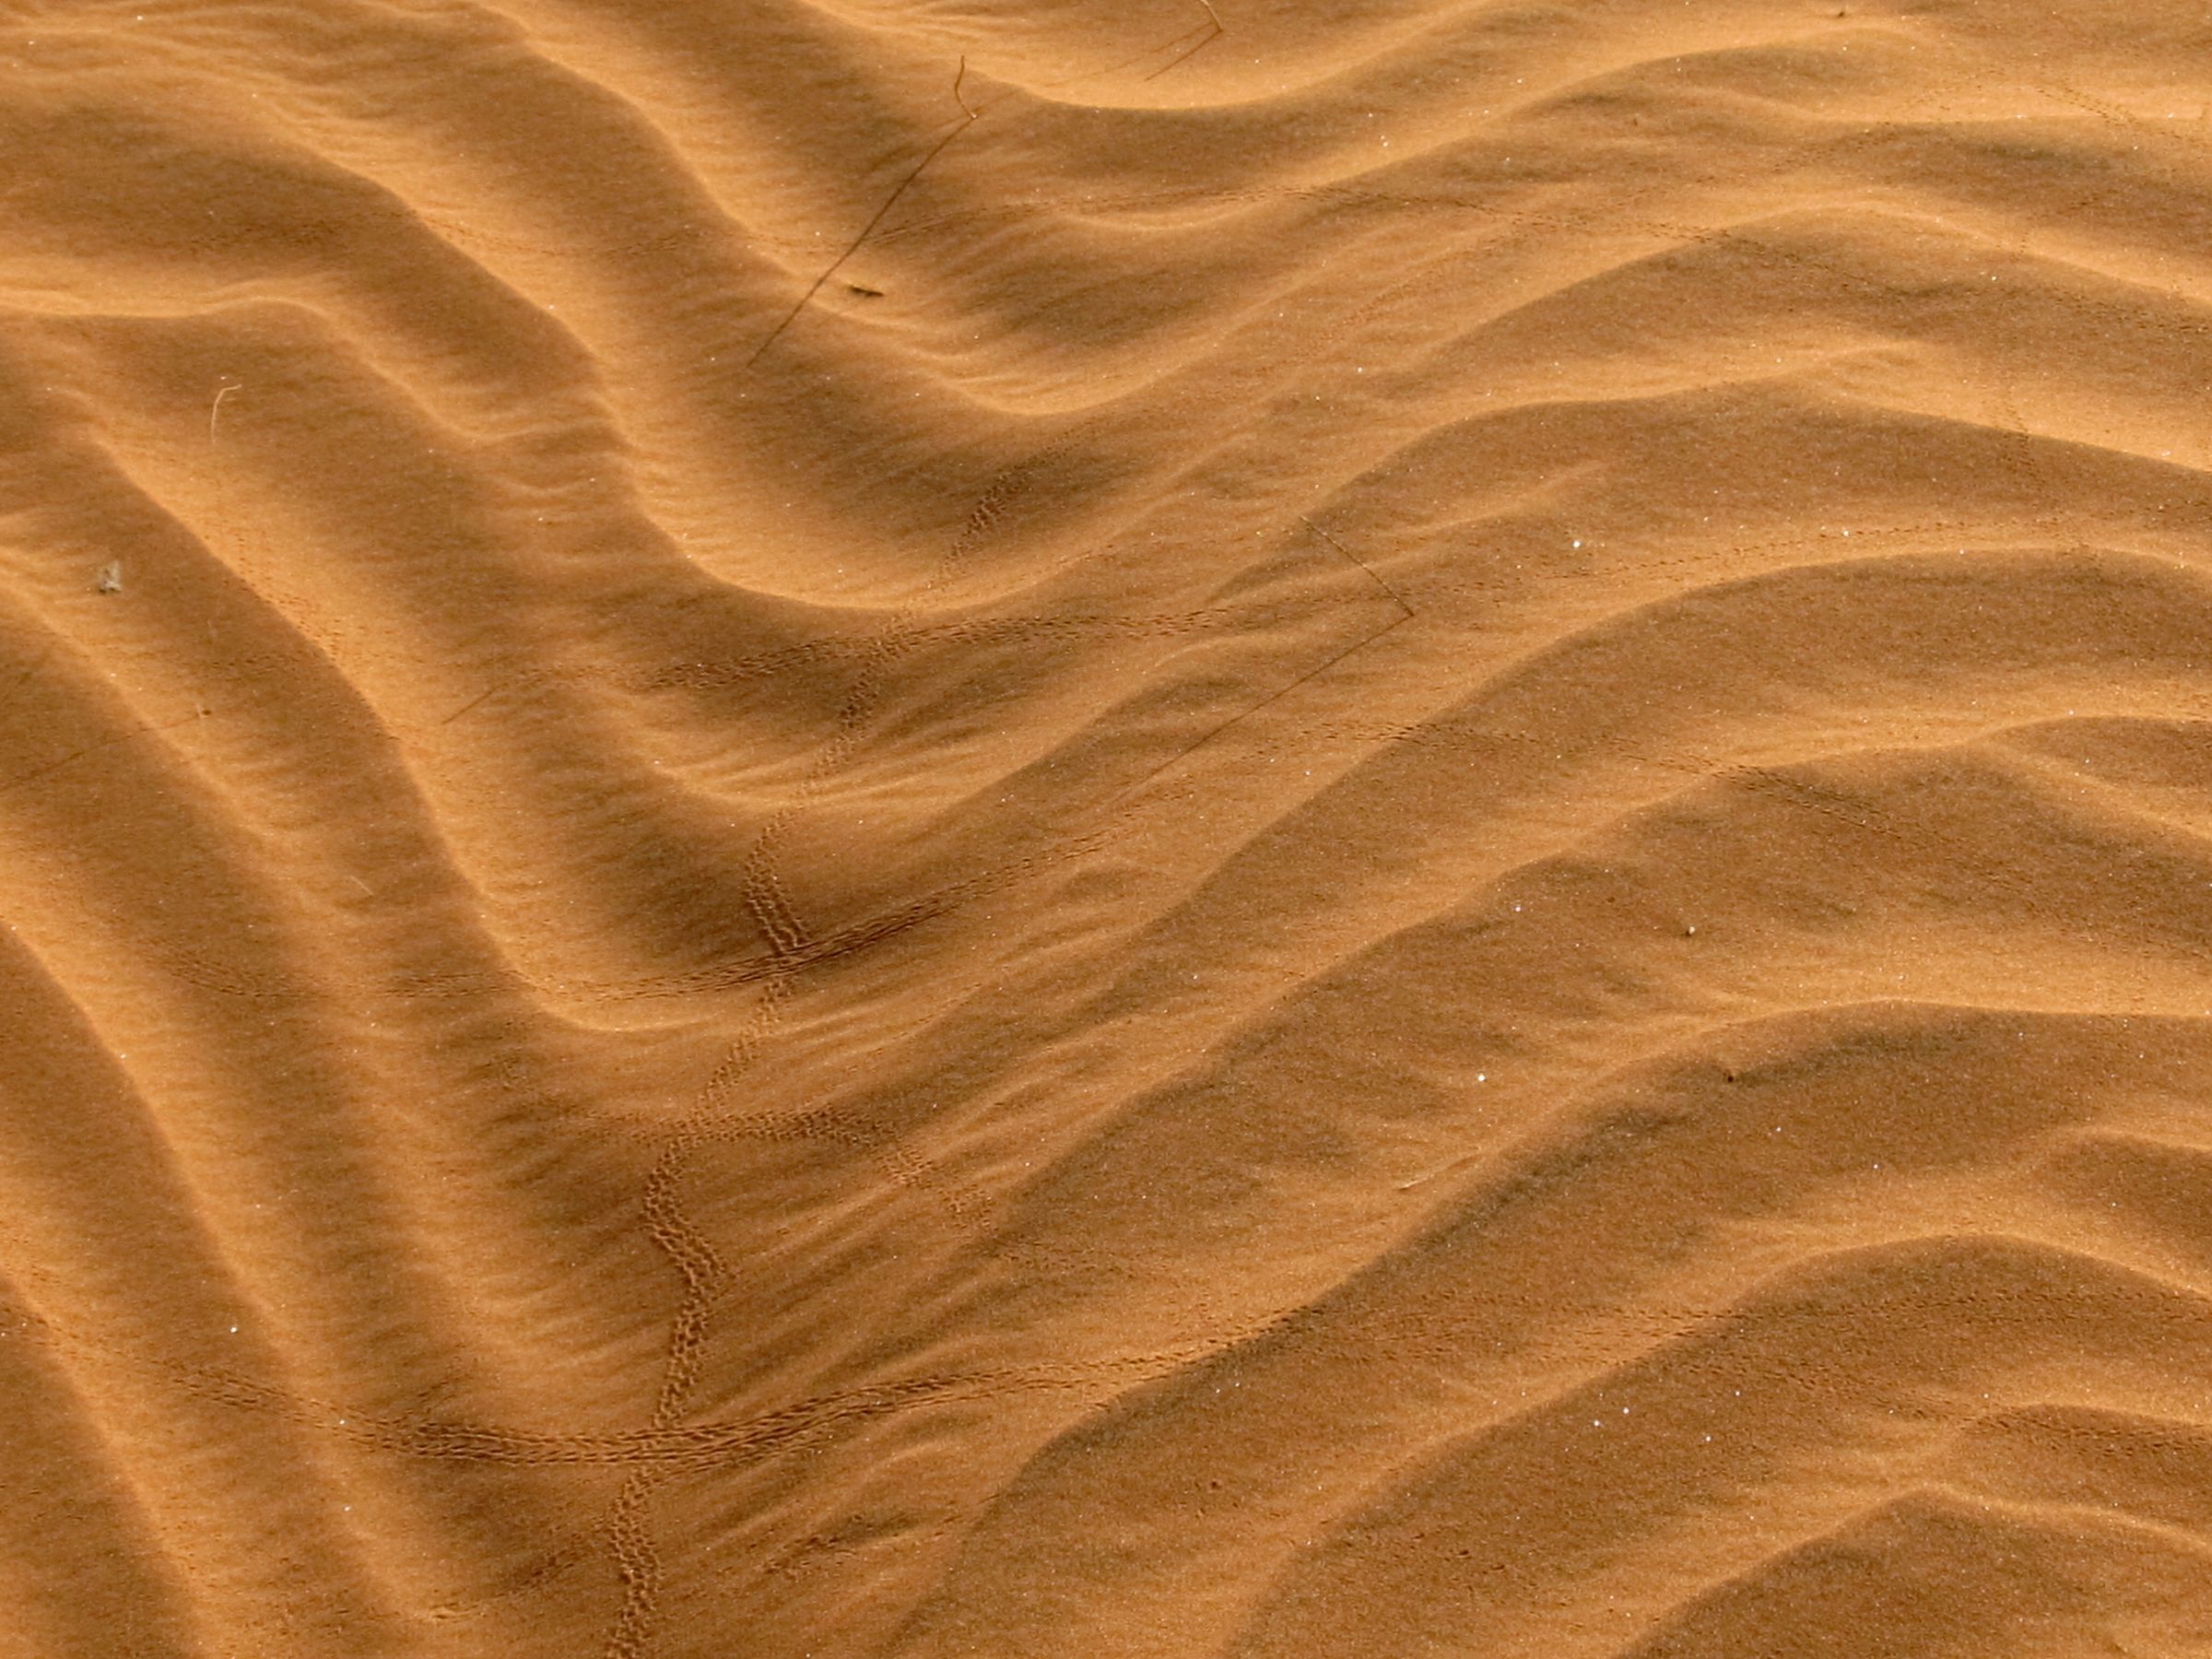 Ripples in the sand dunes of Namibia